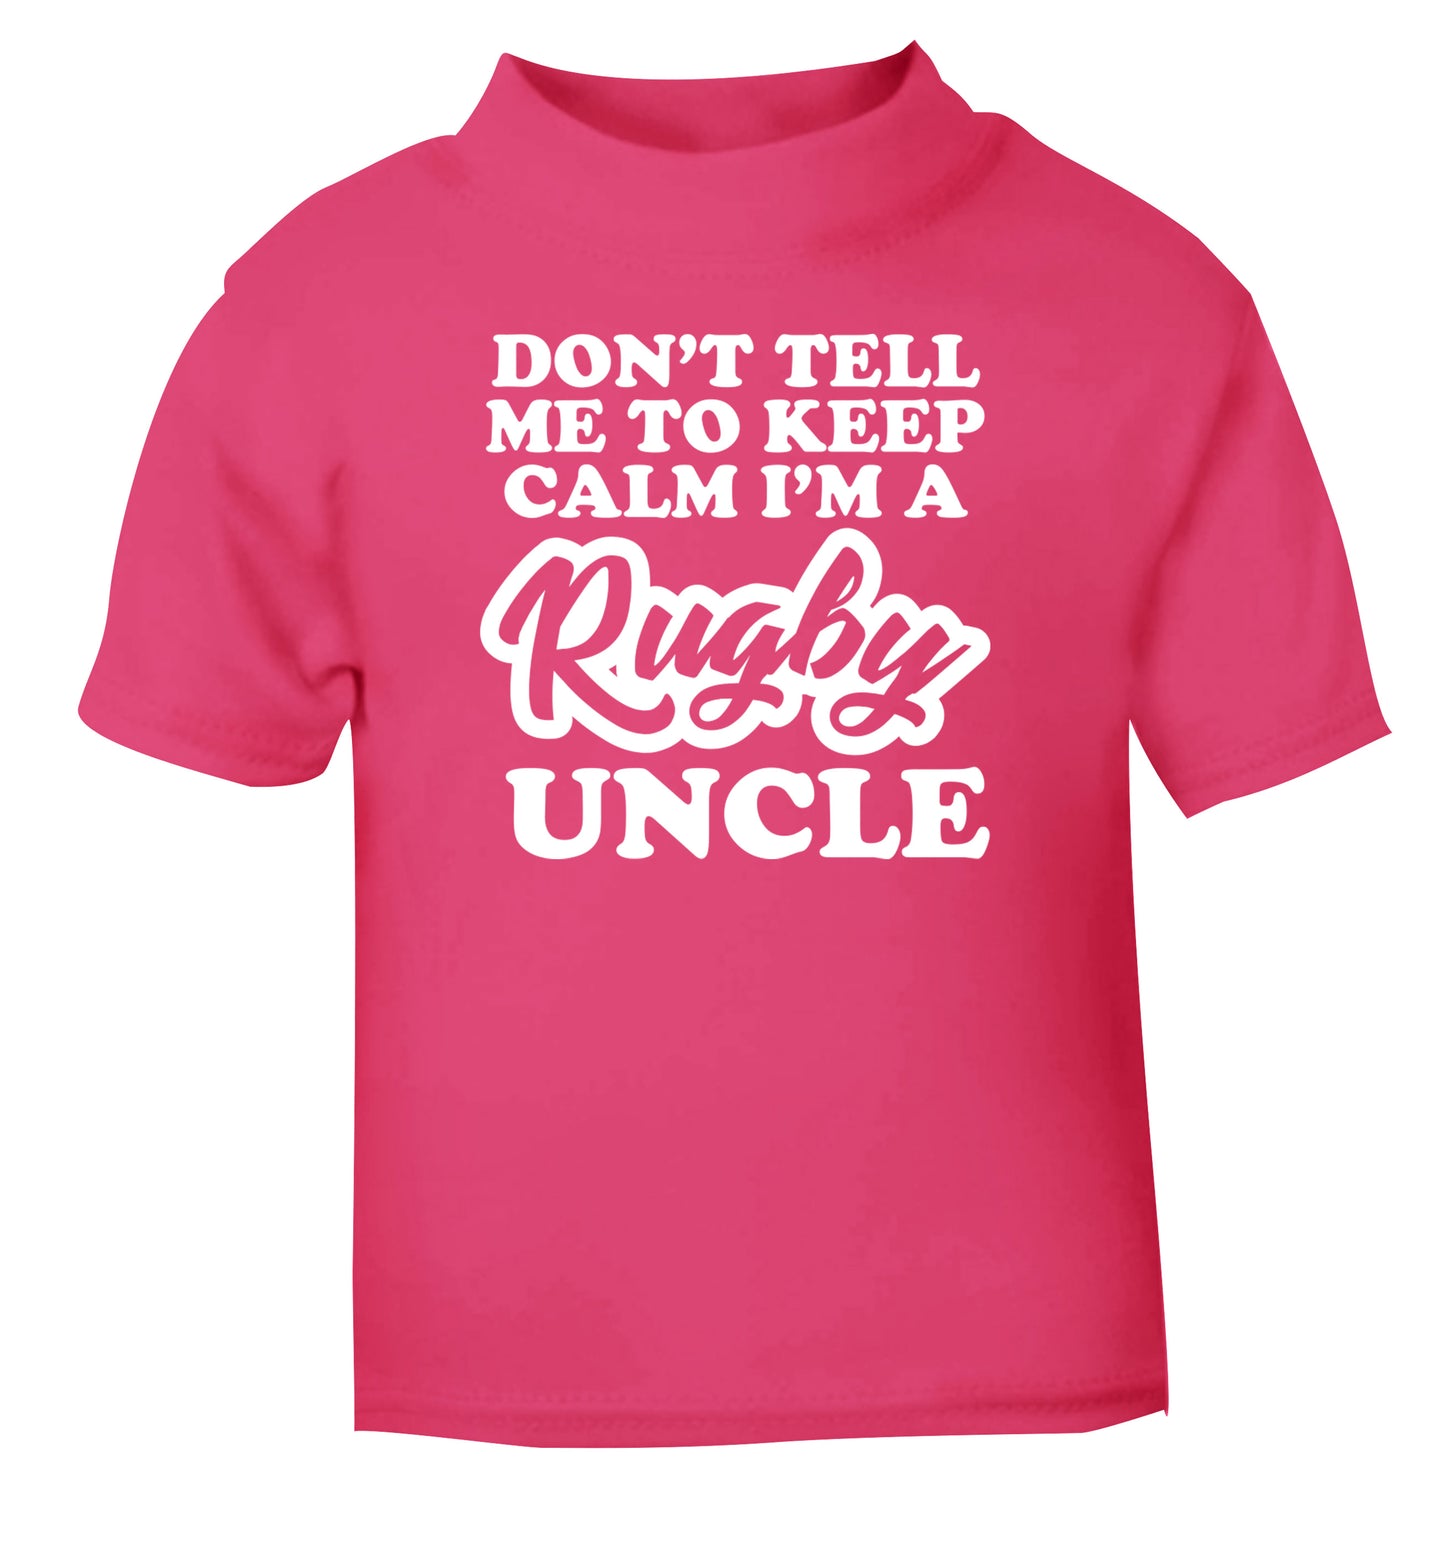 Don't tell me to keep calm I'm a rugby uncle pink Baby Toddler Tshirt 2 Years